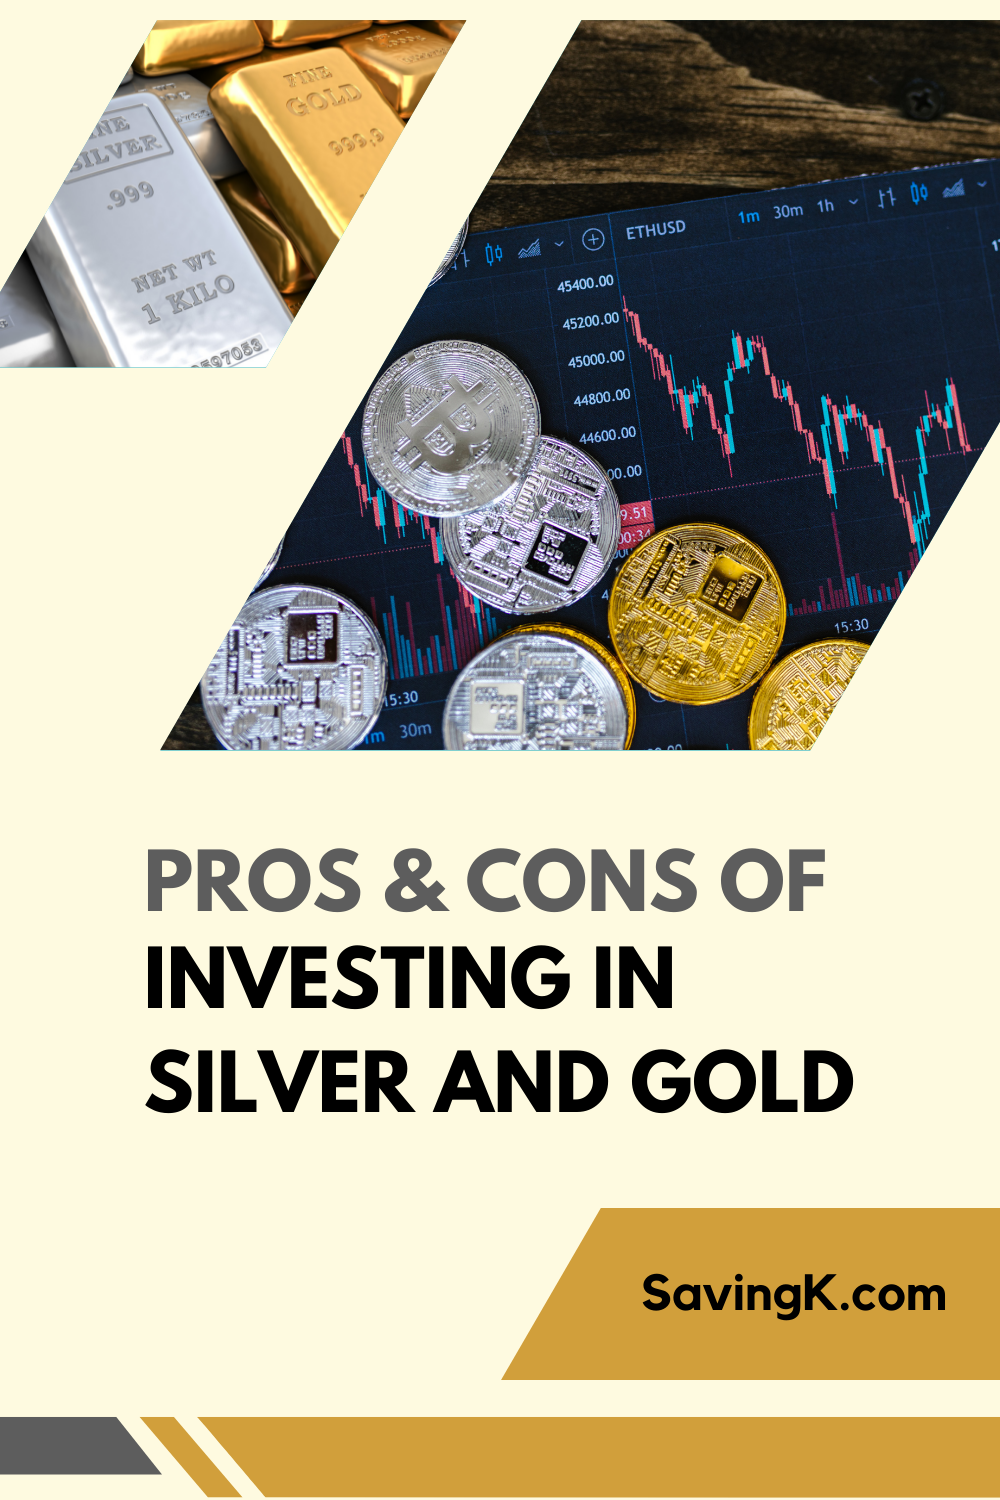 Is Investing In Silver And Gold A Good Idea? The Pros and Cons